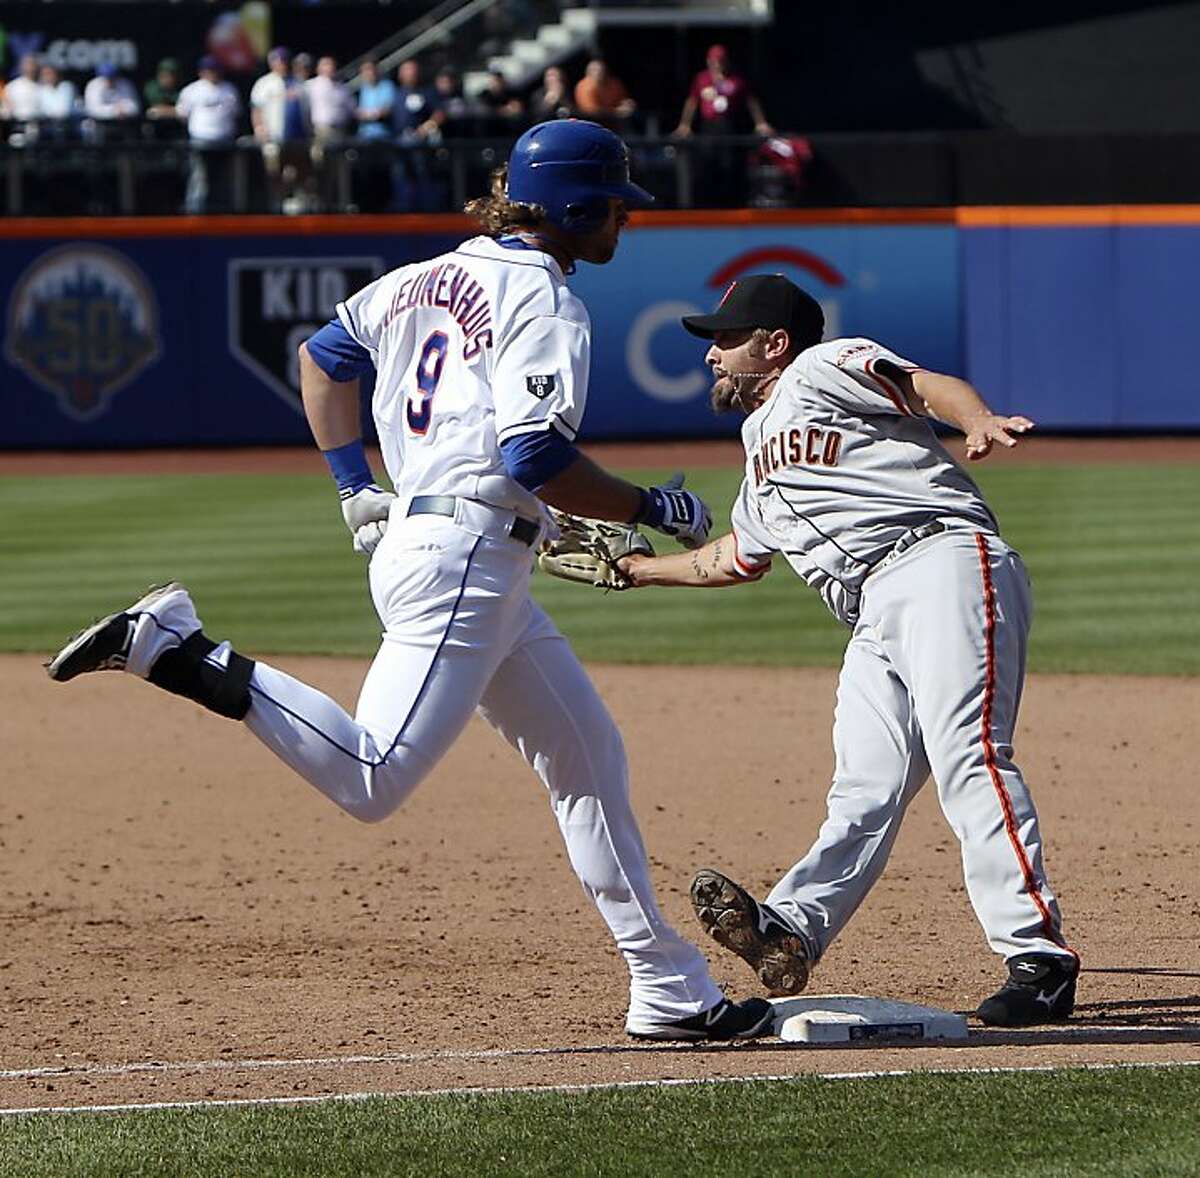 New York Mets' Kirk Nieuwenhuis, left, is safe at first as San Francisco Giants first baseman Aubrey Huff has to step off the base to try for a double play during the ninth inning of a baseball game, Saturday, April 21, 2012, at Citi Field in New York. Because the Giants could not turn the double play, the Mets scored to defeat the Giants 5-4. (AP Photo/Seth Wenig).